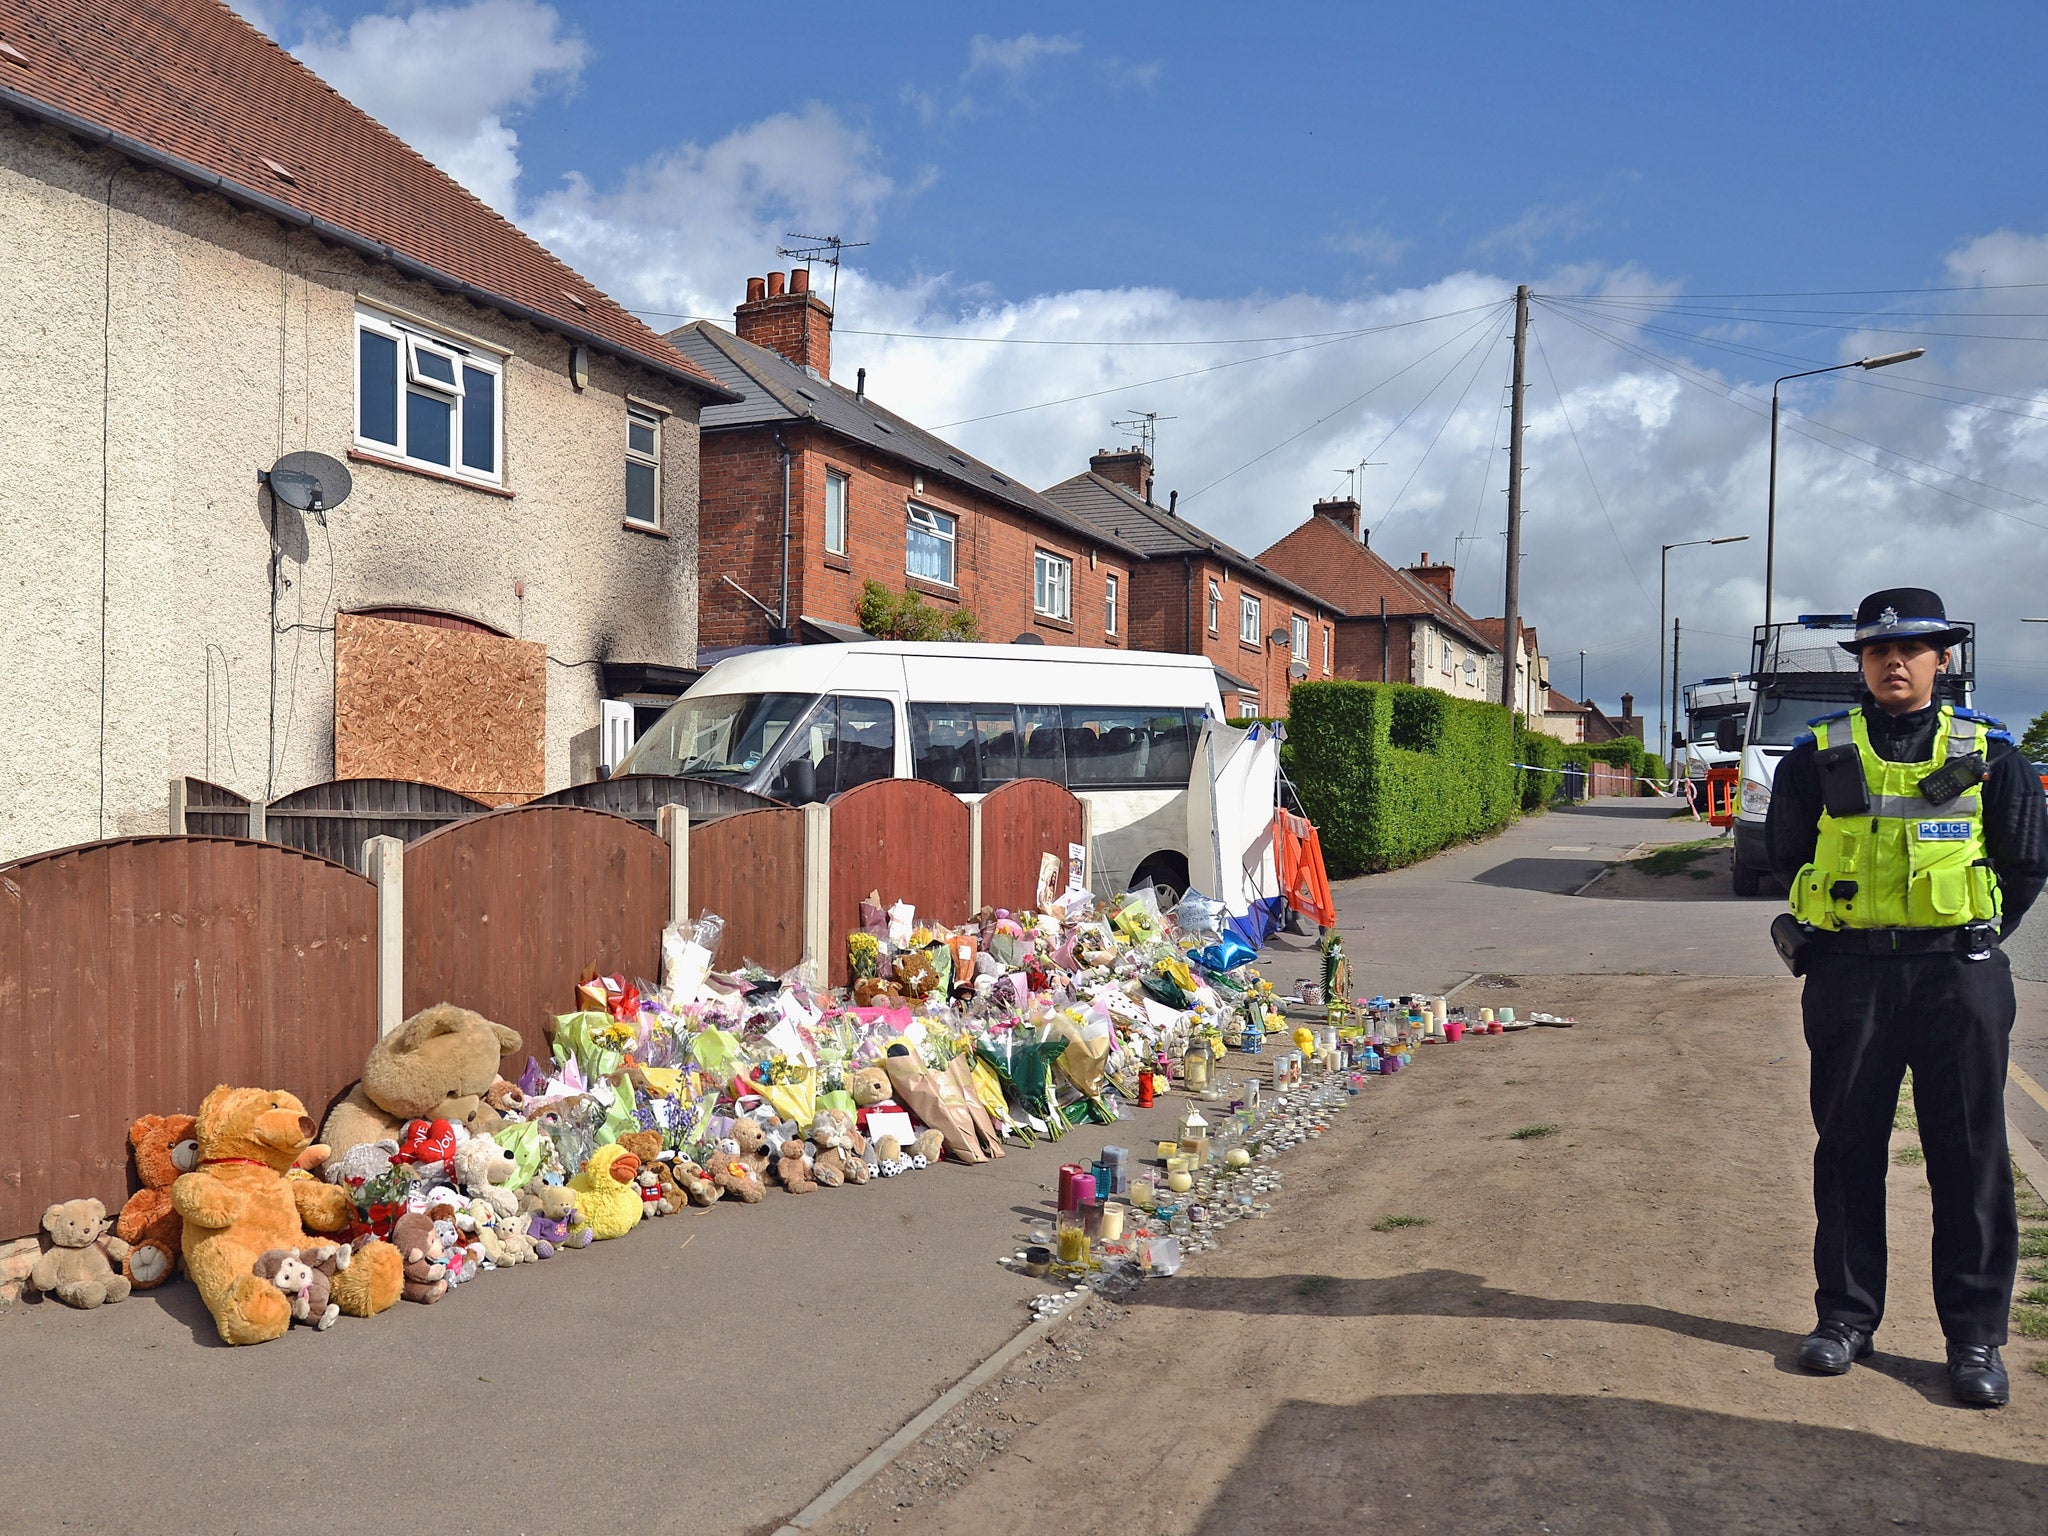 Floral tributes adorned the pavement outside the Philpott home in Allenton following the fire